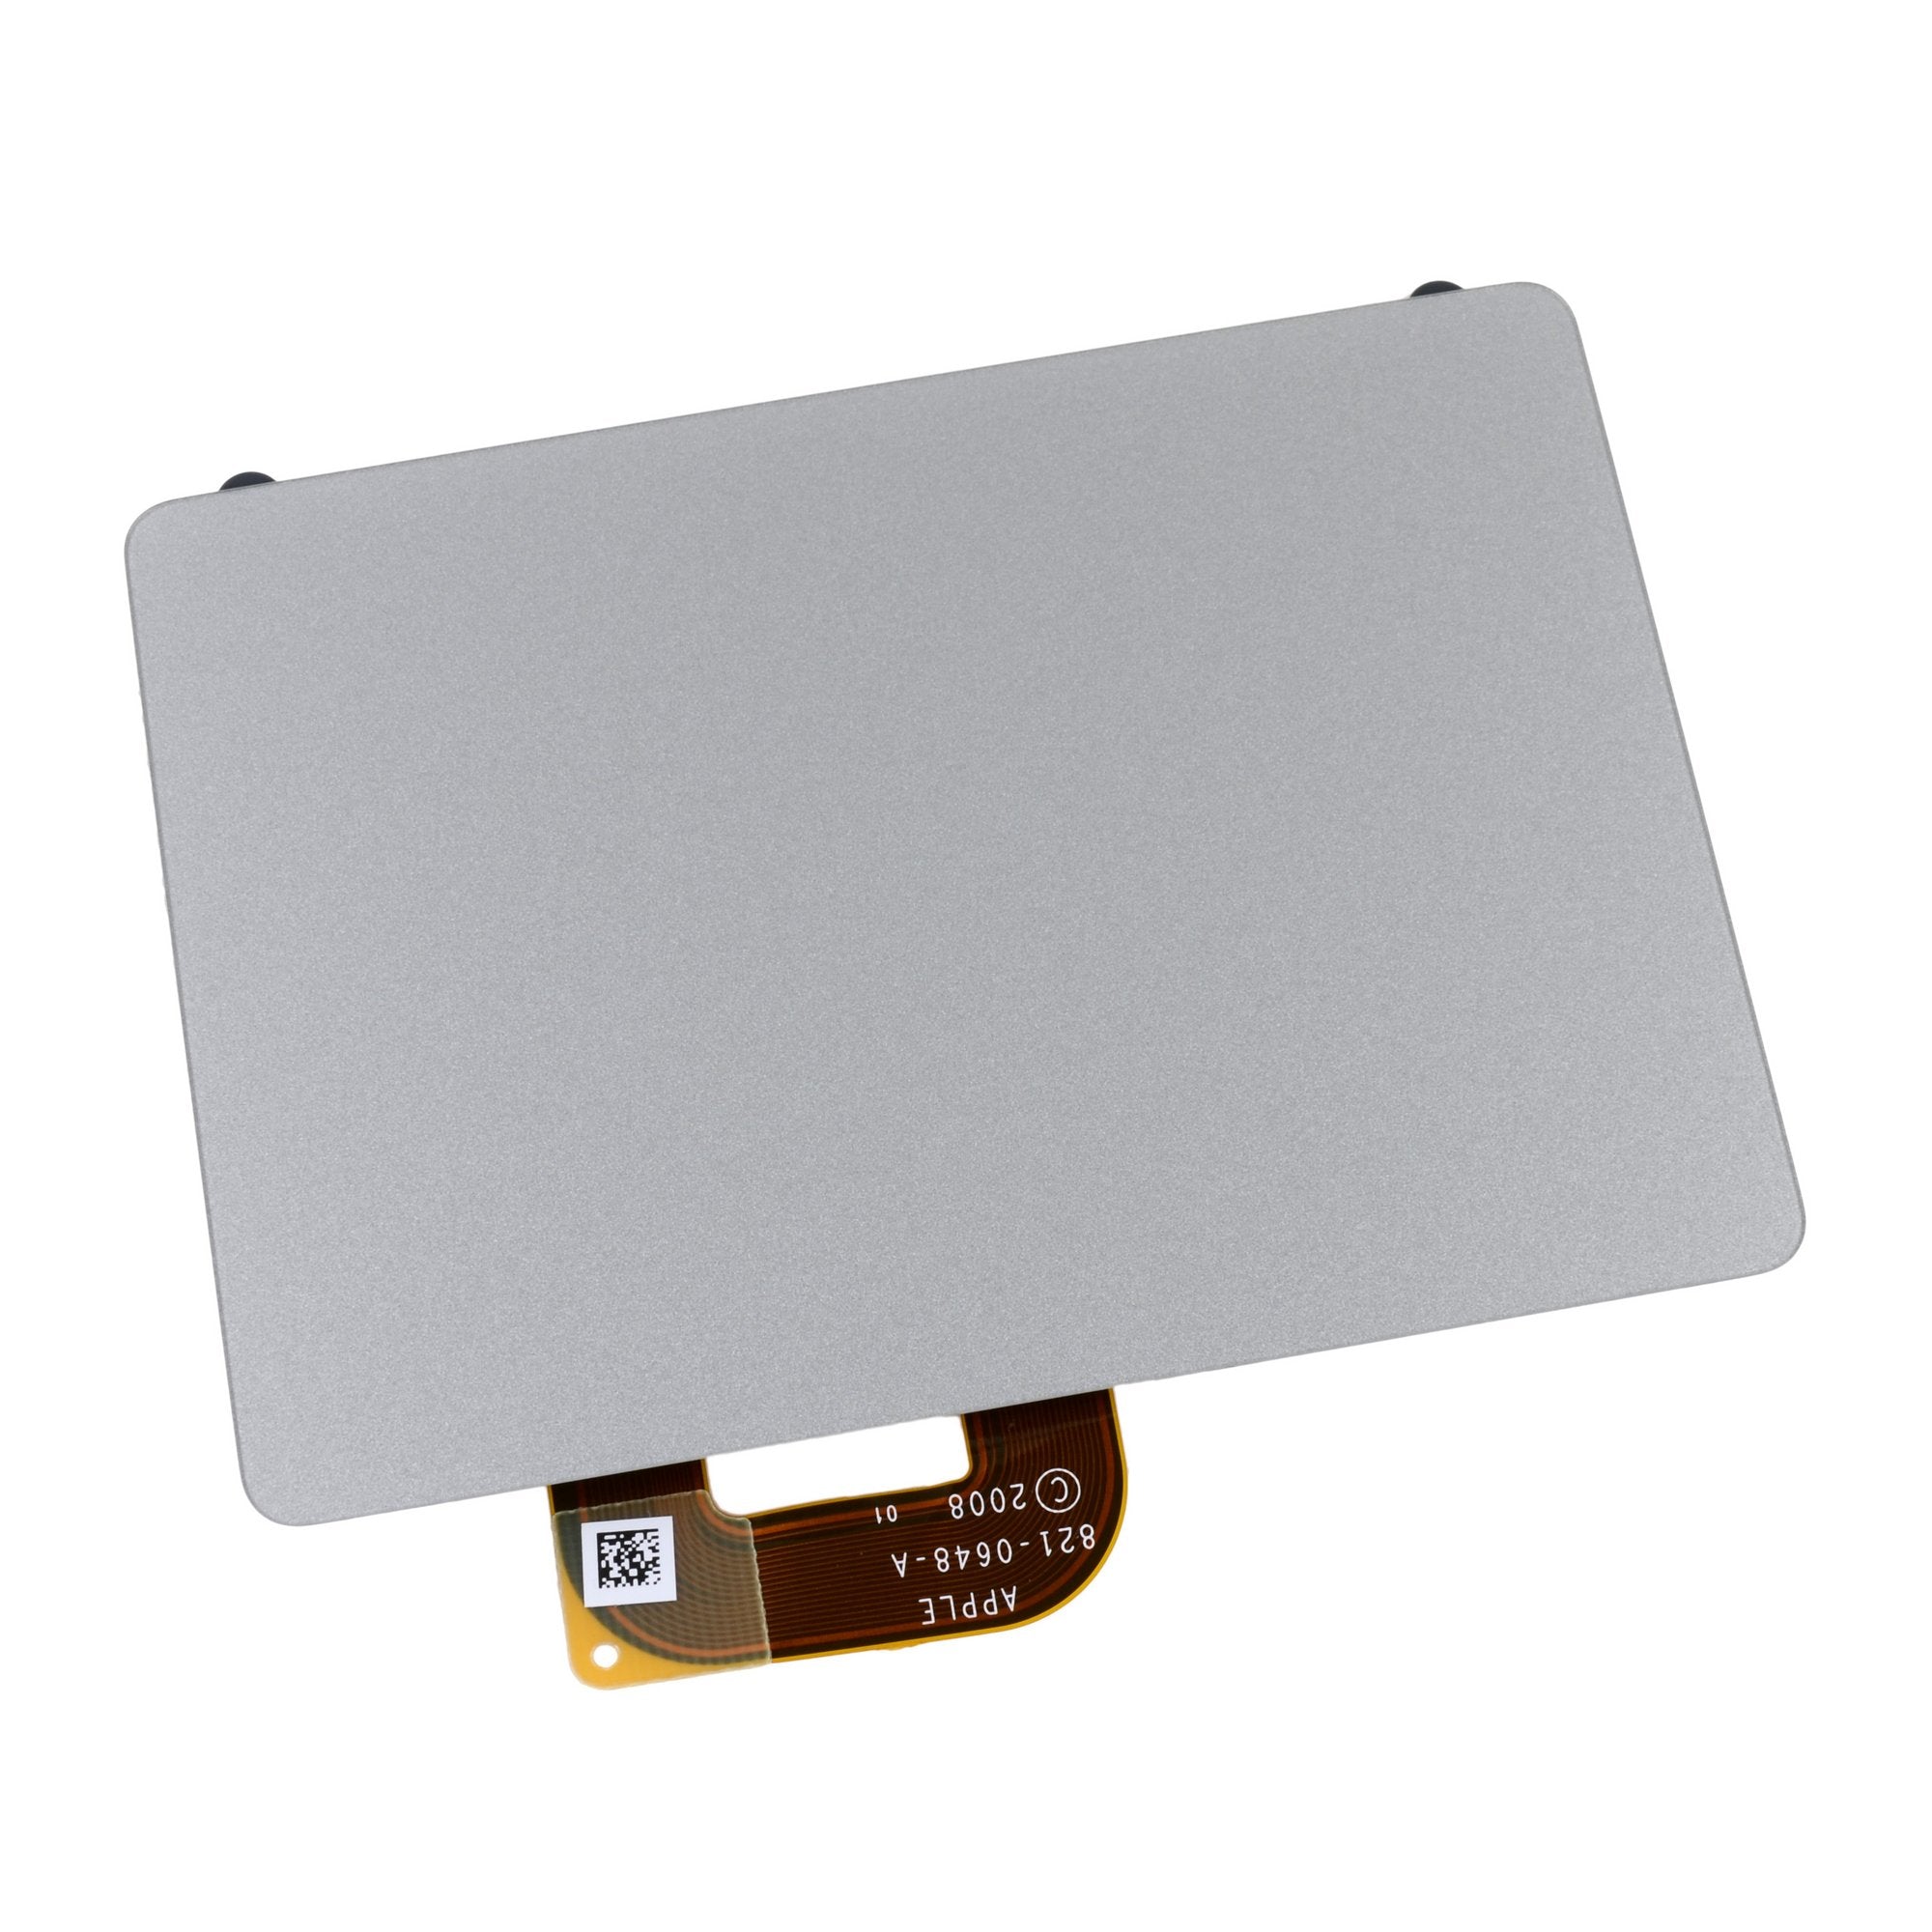 MacBook Pro 15" Unibody (Late 2008-Early 2009) Trackpad